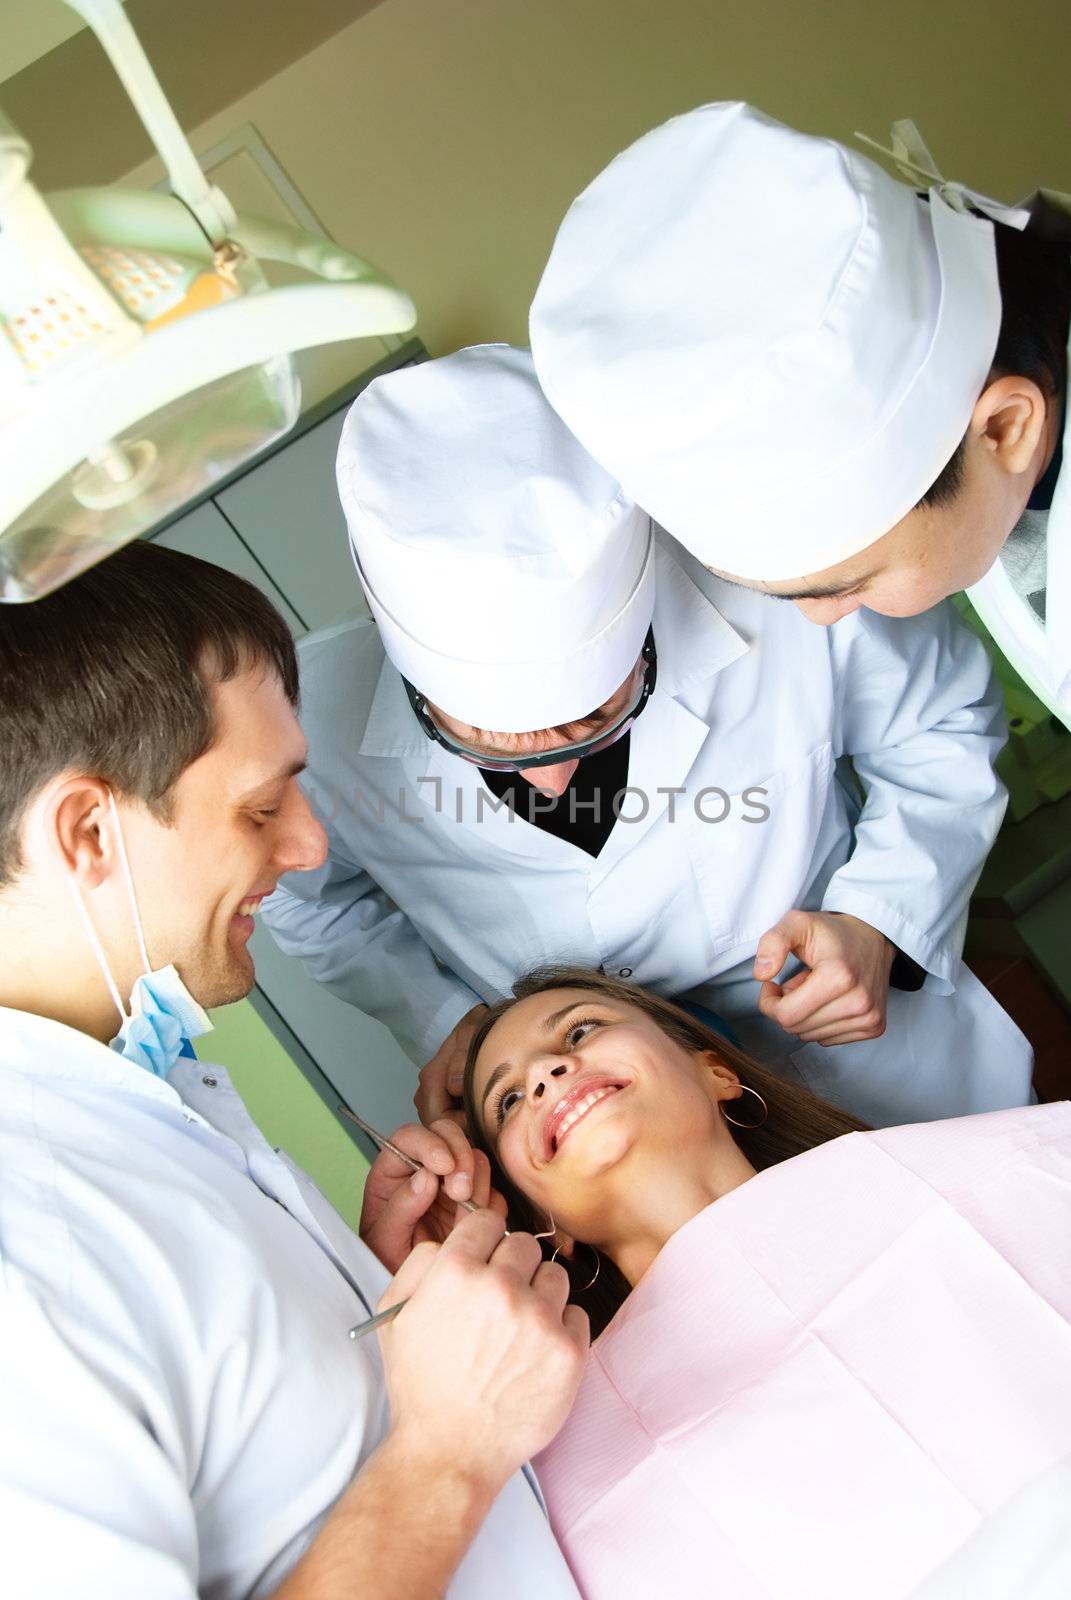 three dentists bend over the patient and examine her teeth